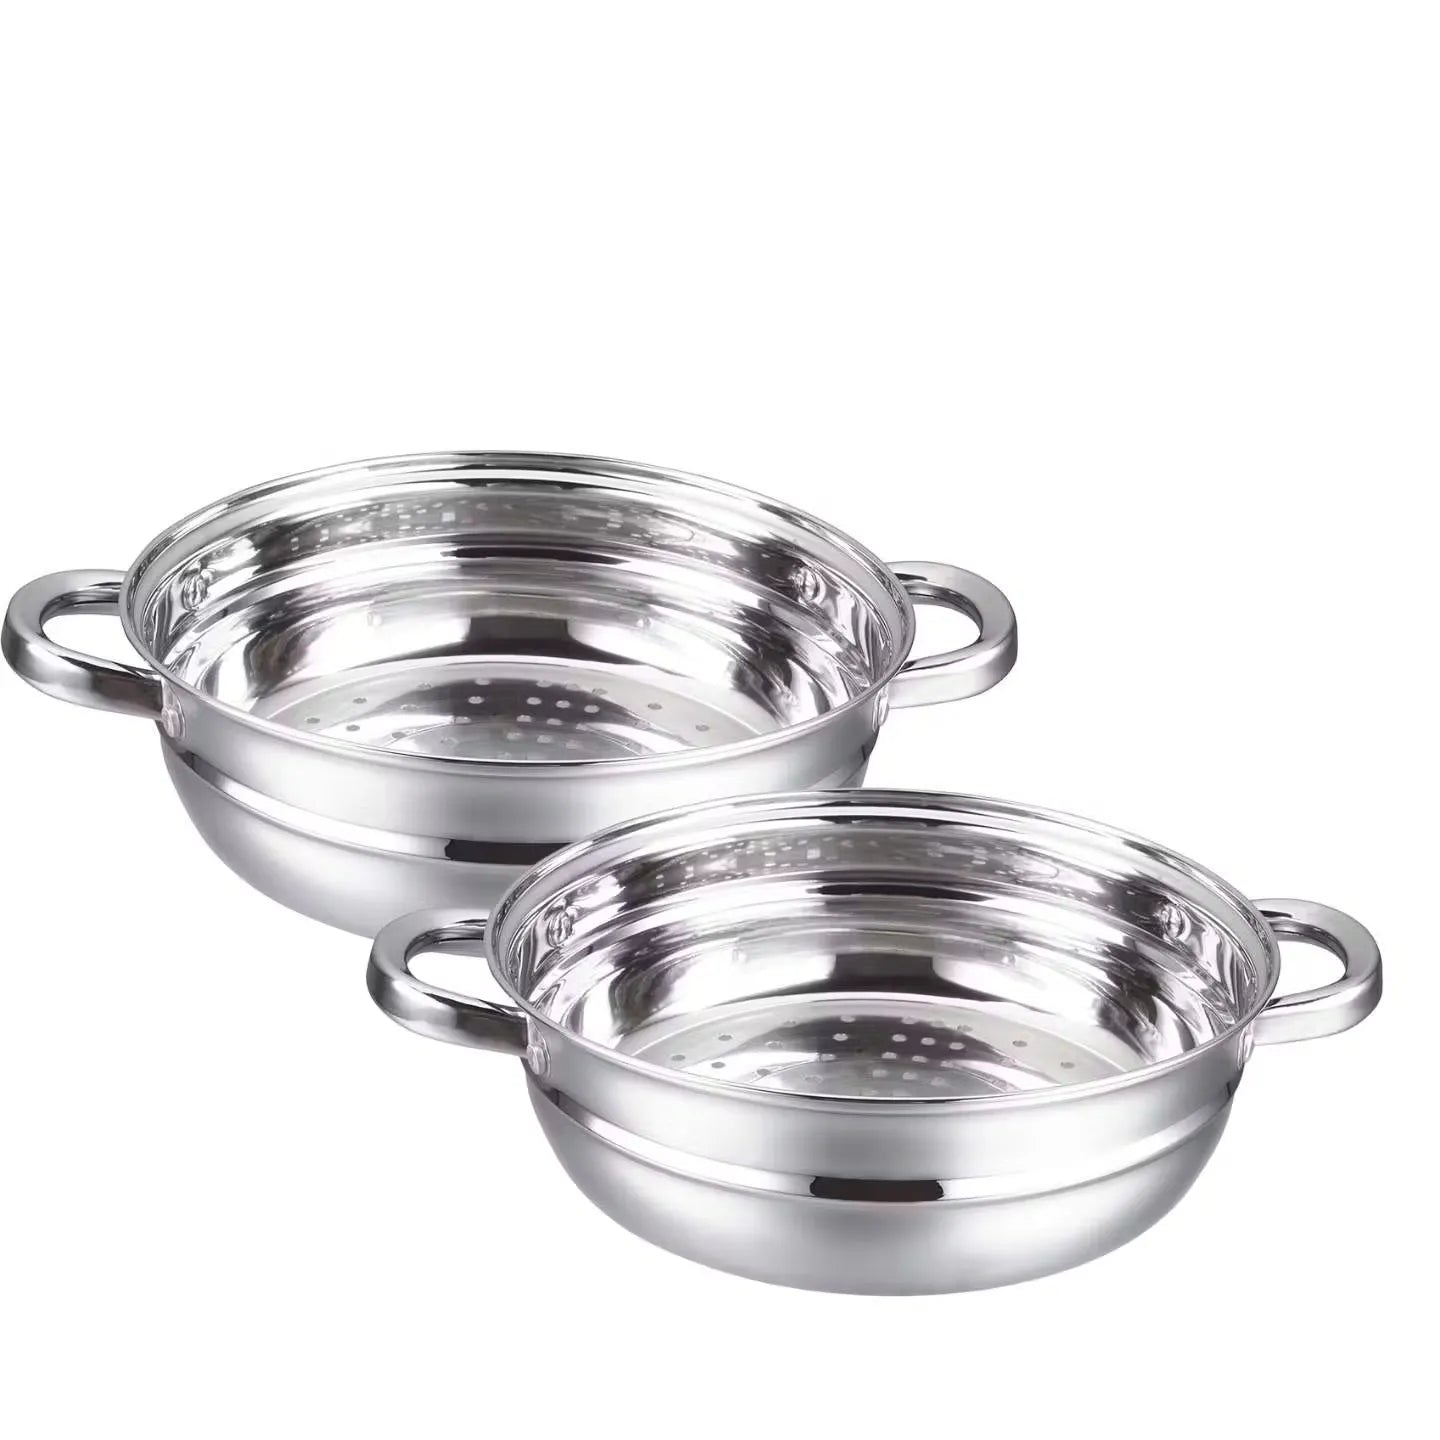 Insiya 8-pc Stainless Steel: Cook & shine in your kitchen.   Sleek & durable Insiya pots/pans. Elevate your cooking.   Shine in the kitchen! 8-piece Insiya cookware set. Shine in your kitchen! Get Insiya 8-pc cookware set.  Upgrade your cooking: Shop Insiya cookware now!